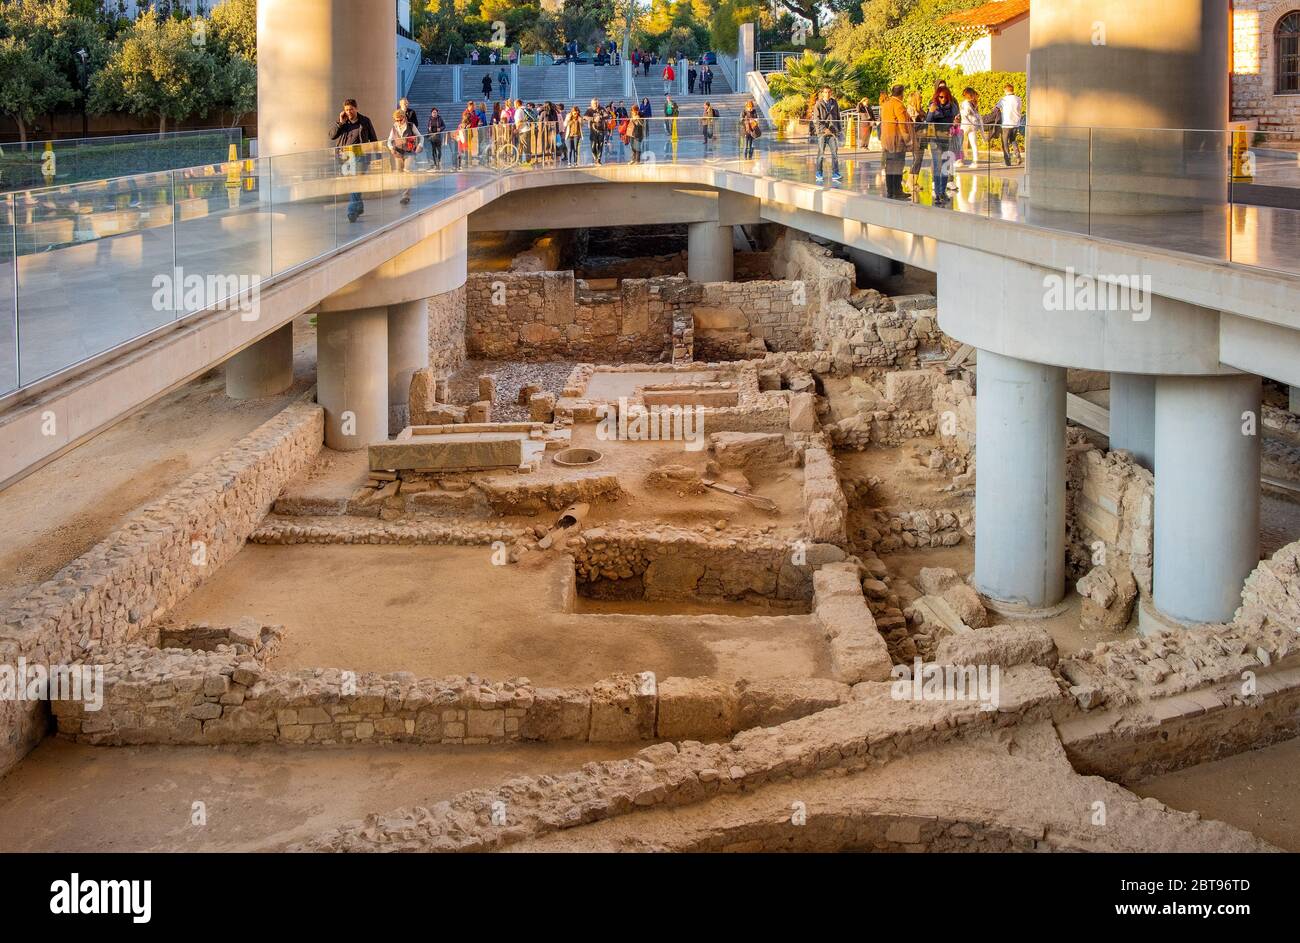 Athens, Attica / Greece - 2018/03/30: Archeological excavation site under main entrance to Acropolis Museum - Mouseio Akropolis - in ancient old town Stock Photo